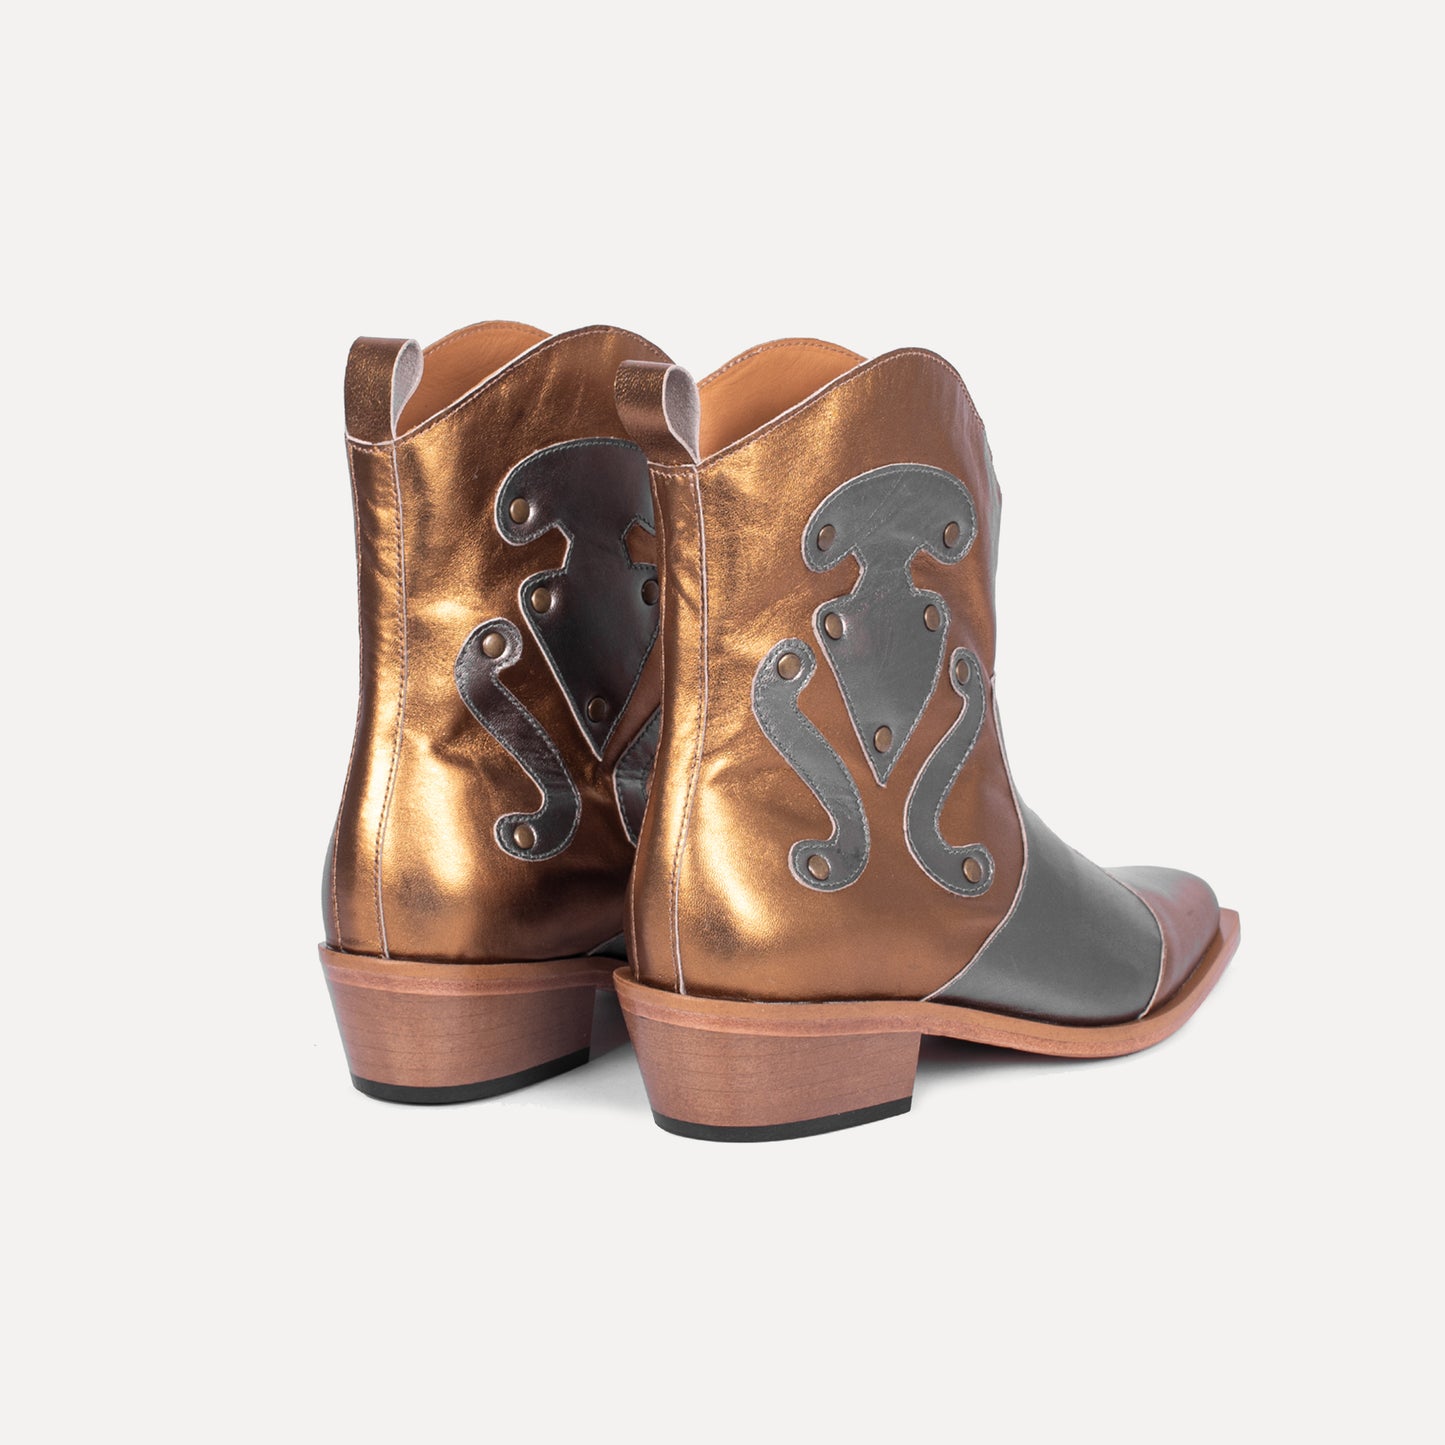 Talhas - cowboy boots in gold and silver